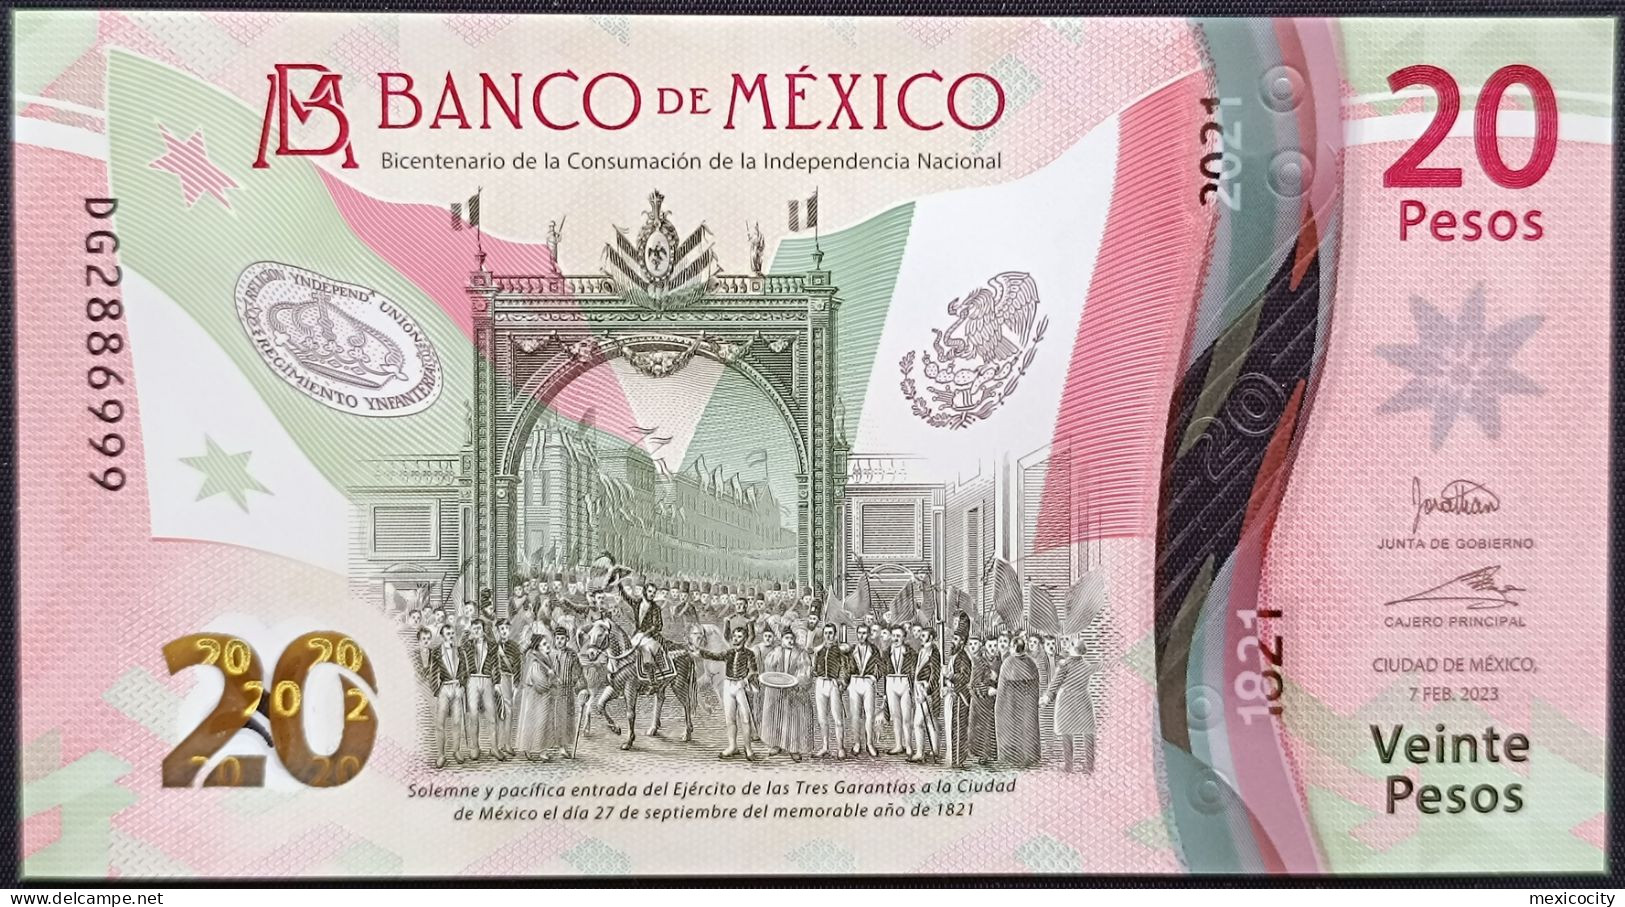 MEXICO $20 SERIES DG2886999 ANGEL # - 7-FEBR-2023 INDEPENDENCE POLYMER NOTE BU Mint Crisp - Mexico